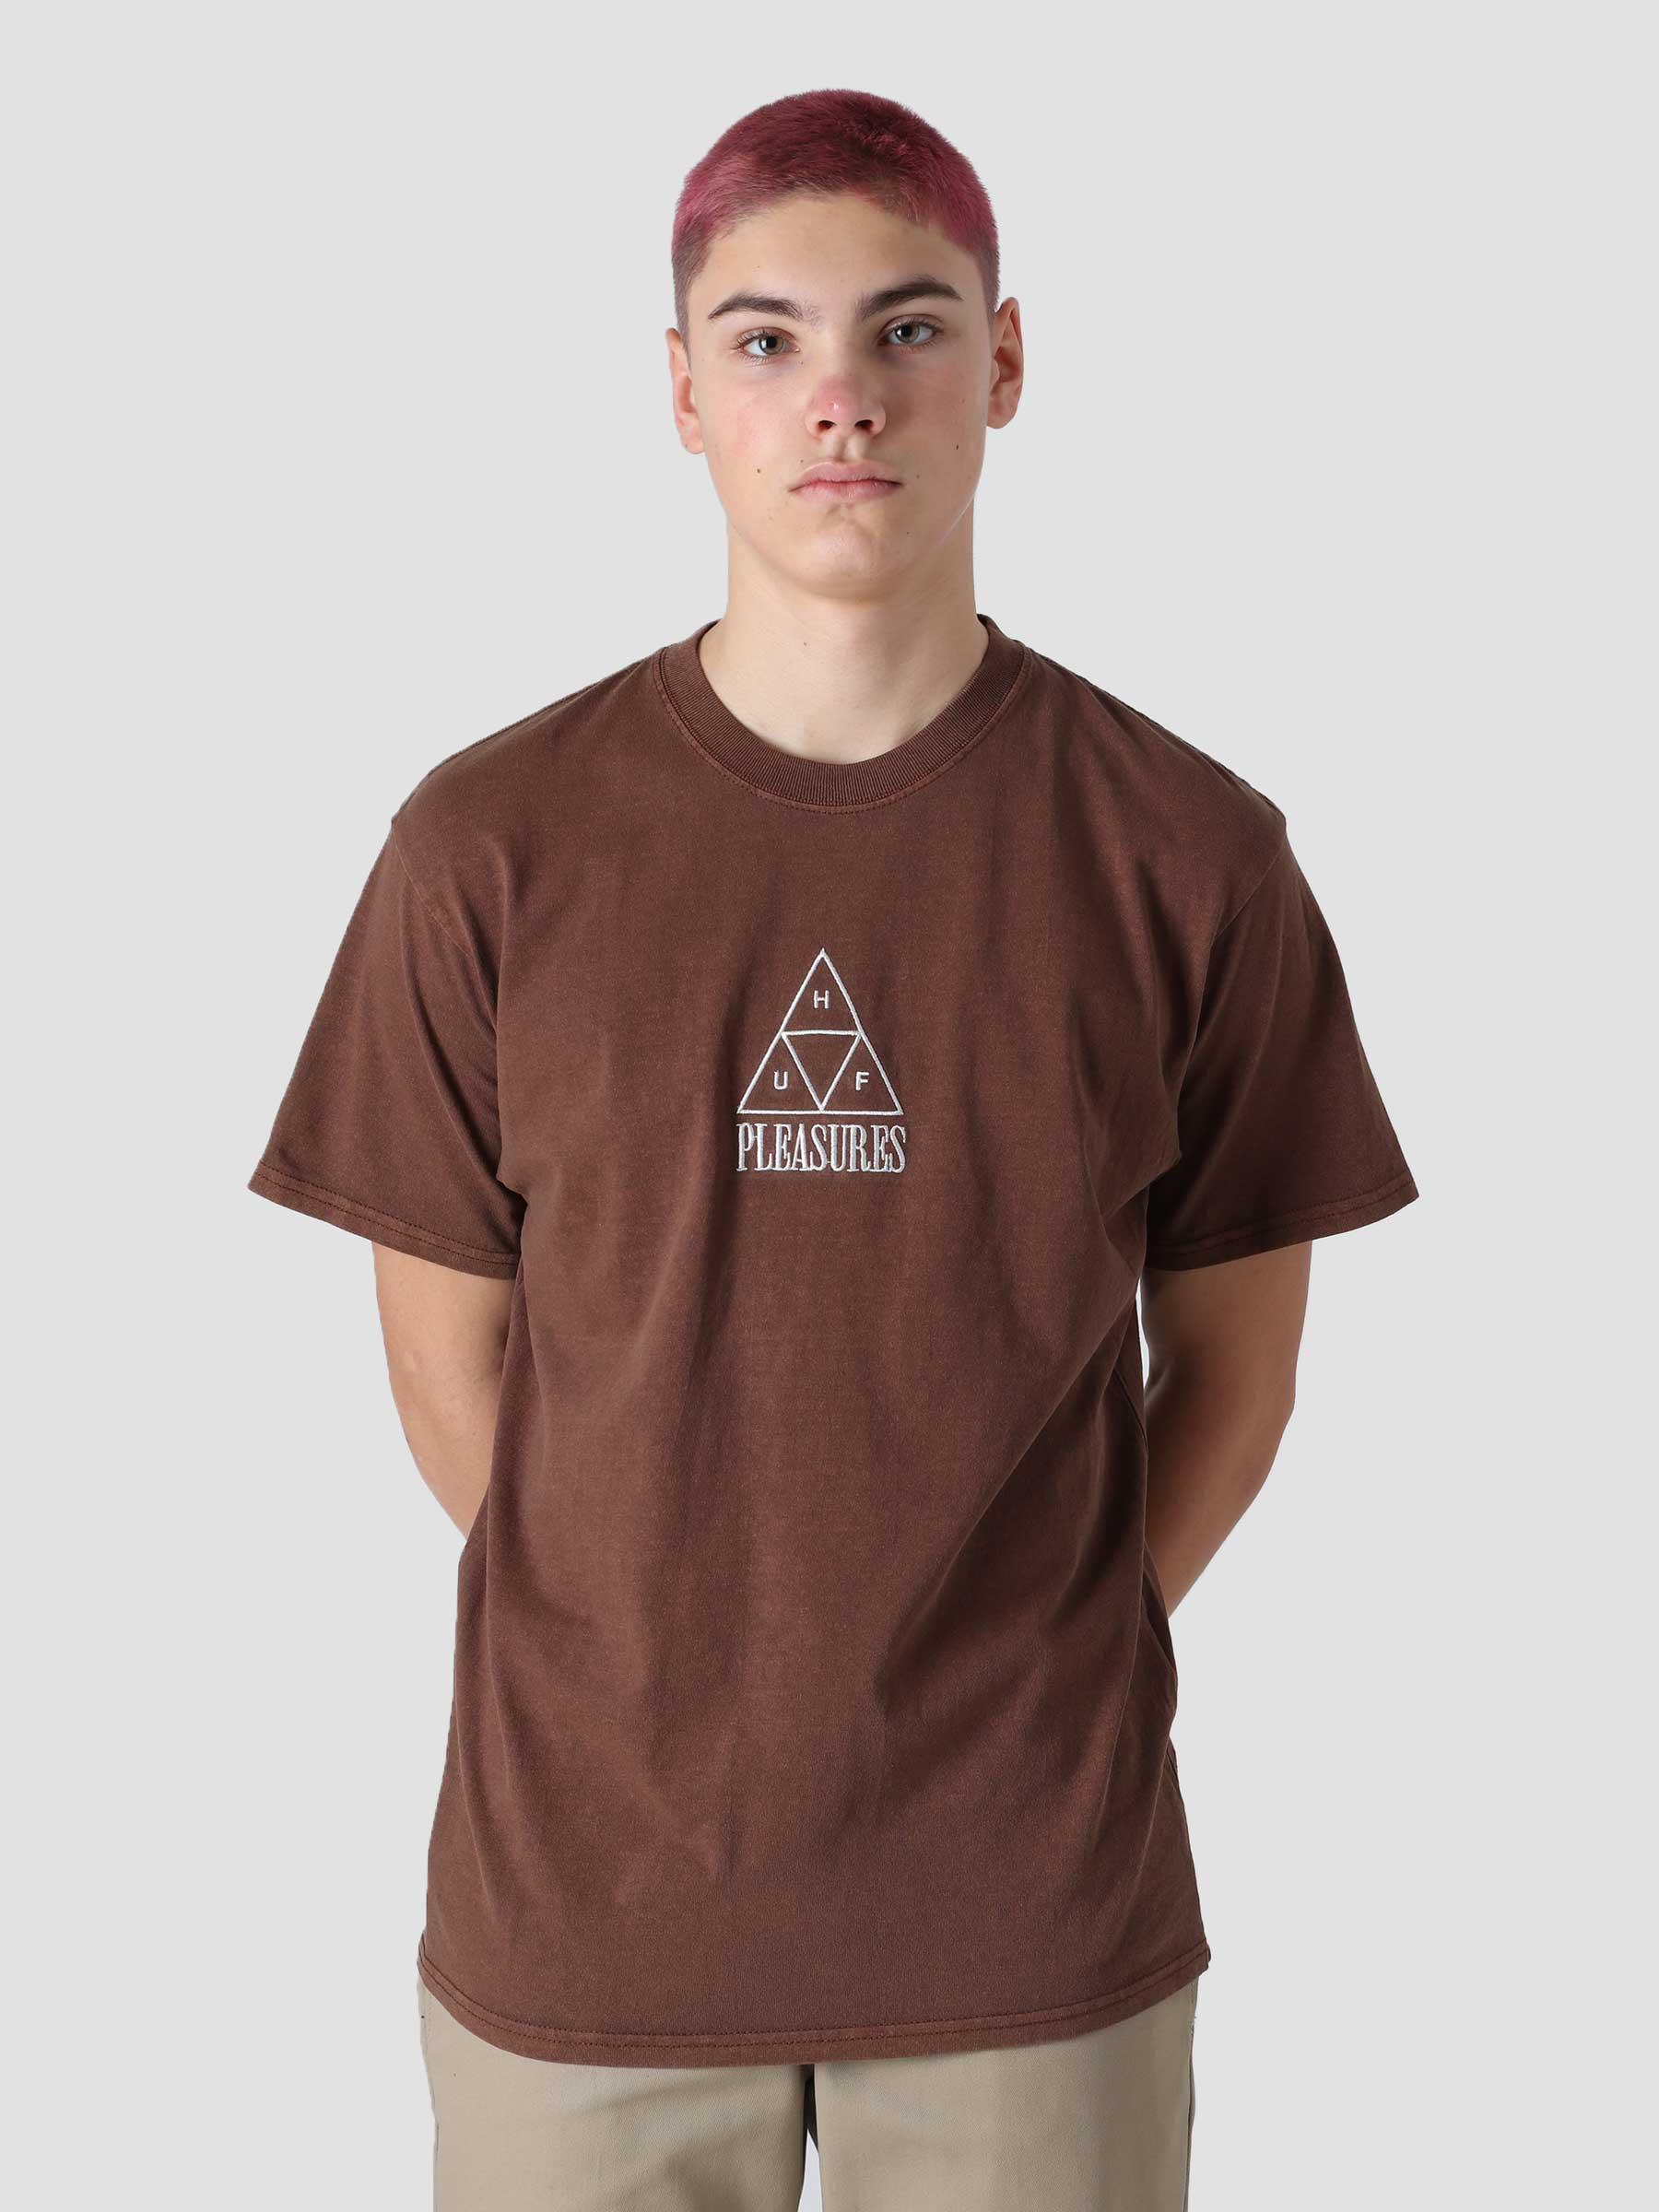 Huf X Pleasures Dyed S/S T-Shirt Brown TS01807